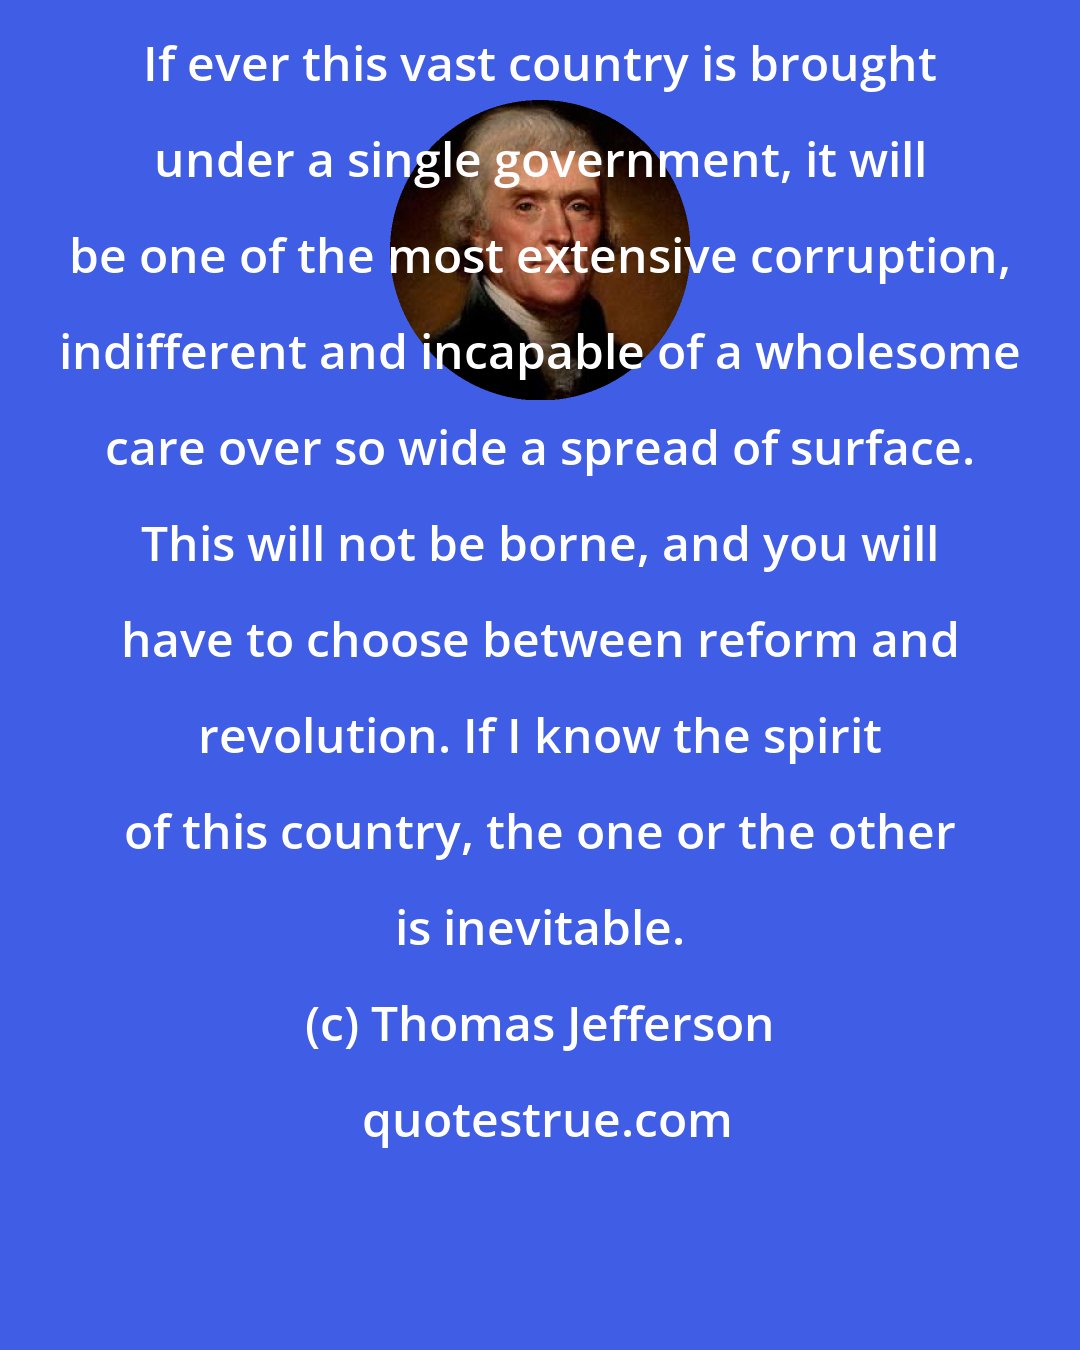 Thomas Jefferson: If ever this vast country is brought under a single government, it will be one of the most extensive corruption, indifferent and incapable of a wholesome care over so wide a spread of surface. This will not be borne, and you will have to choose between reform and revolution. If I know the spirit of this country, the one or the other is inevitable.